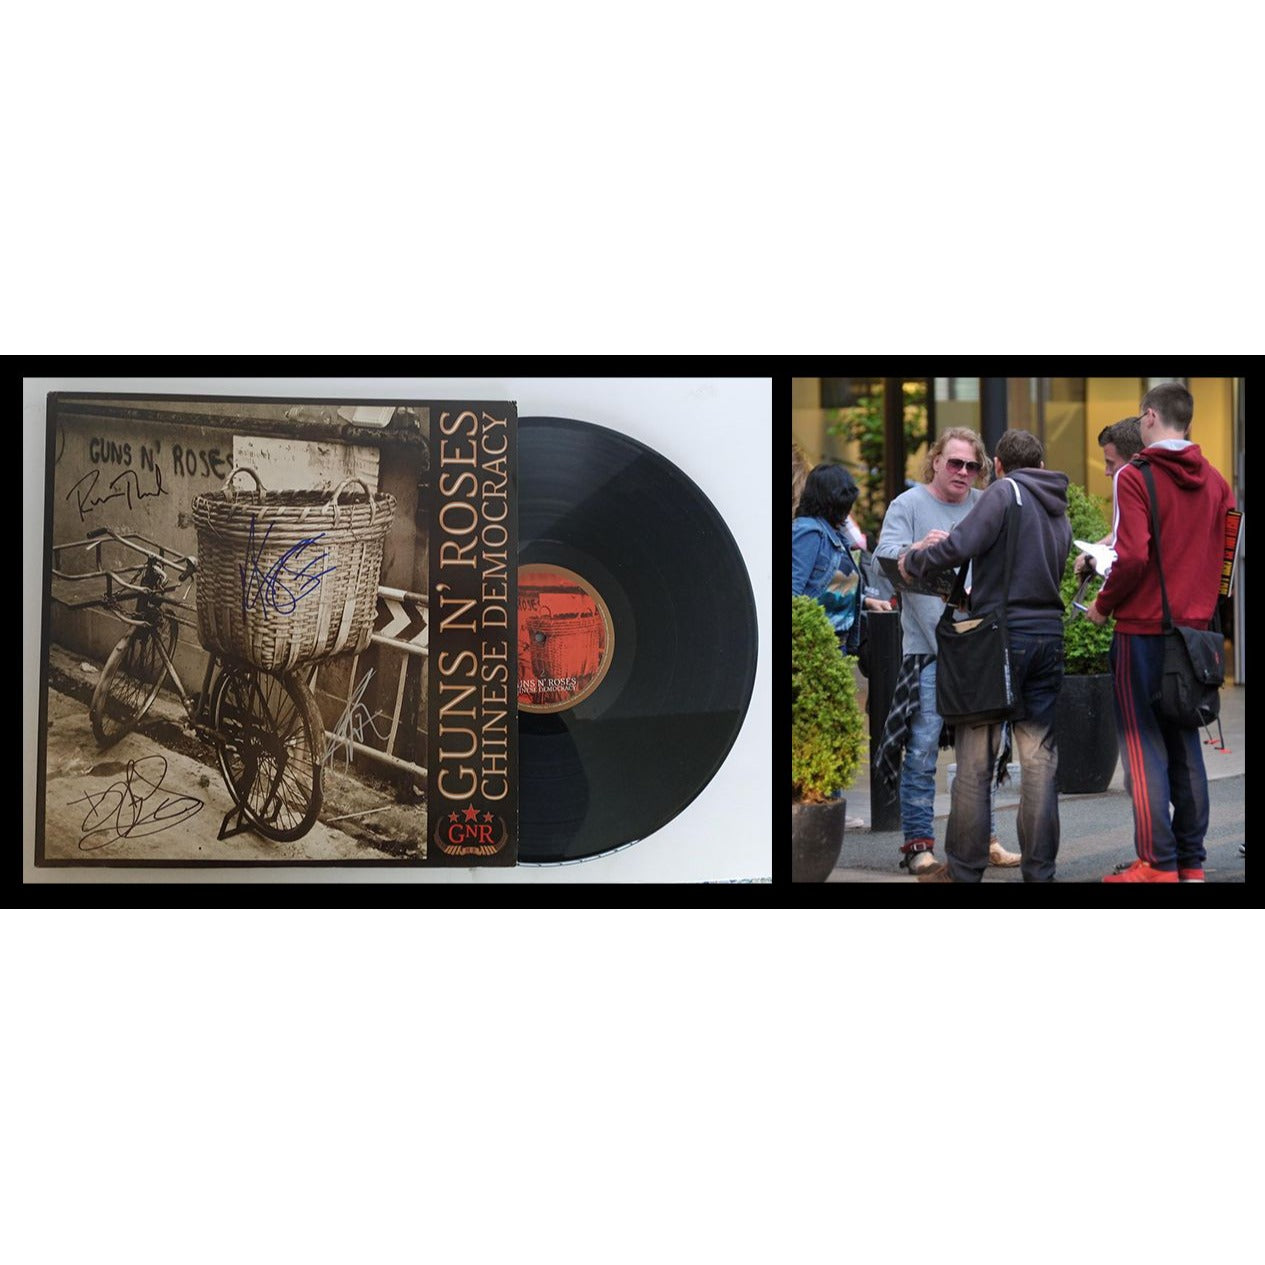 Guns N' Roses Axl Rose Chinese Democracy signed LP with proof